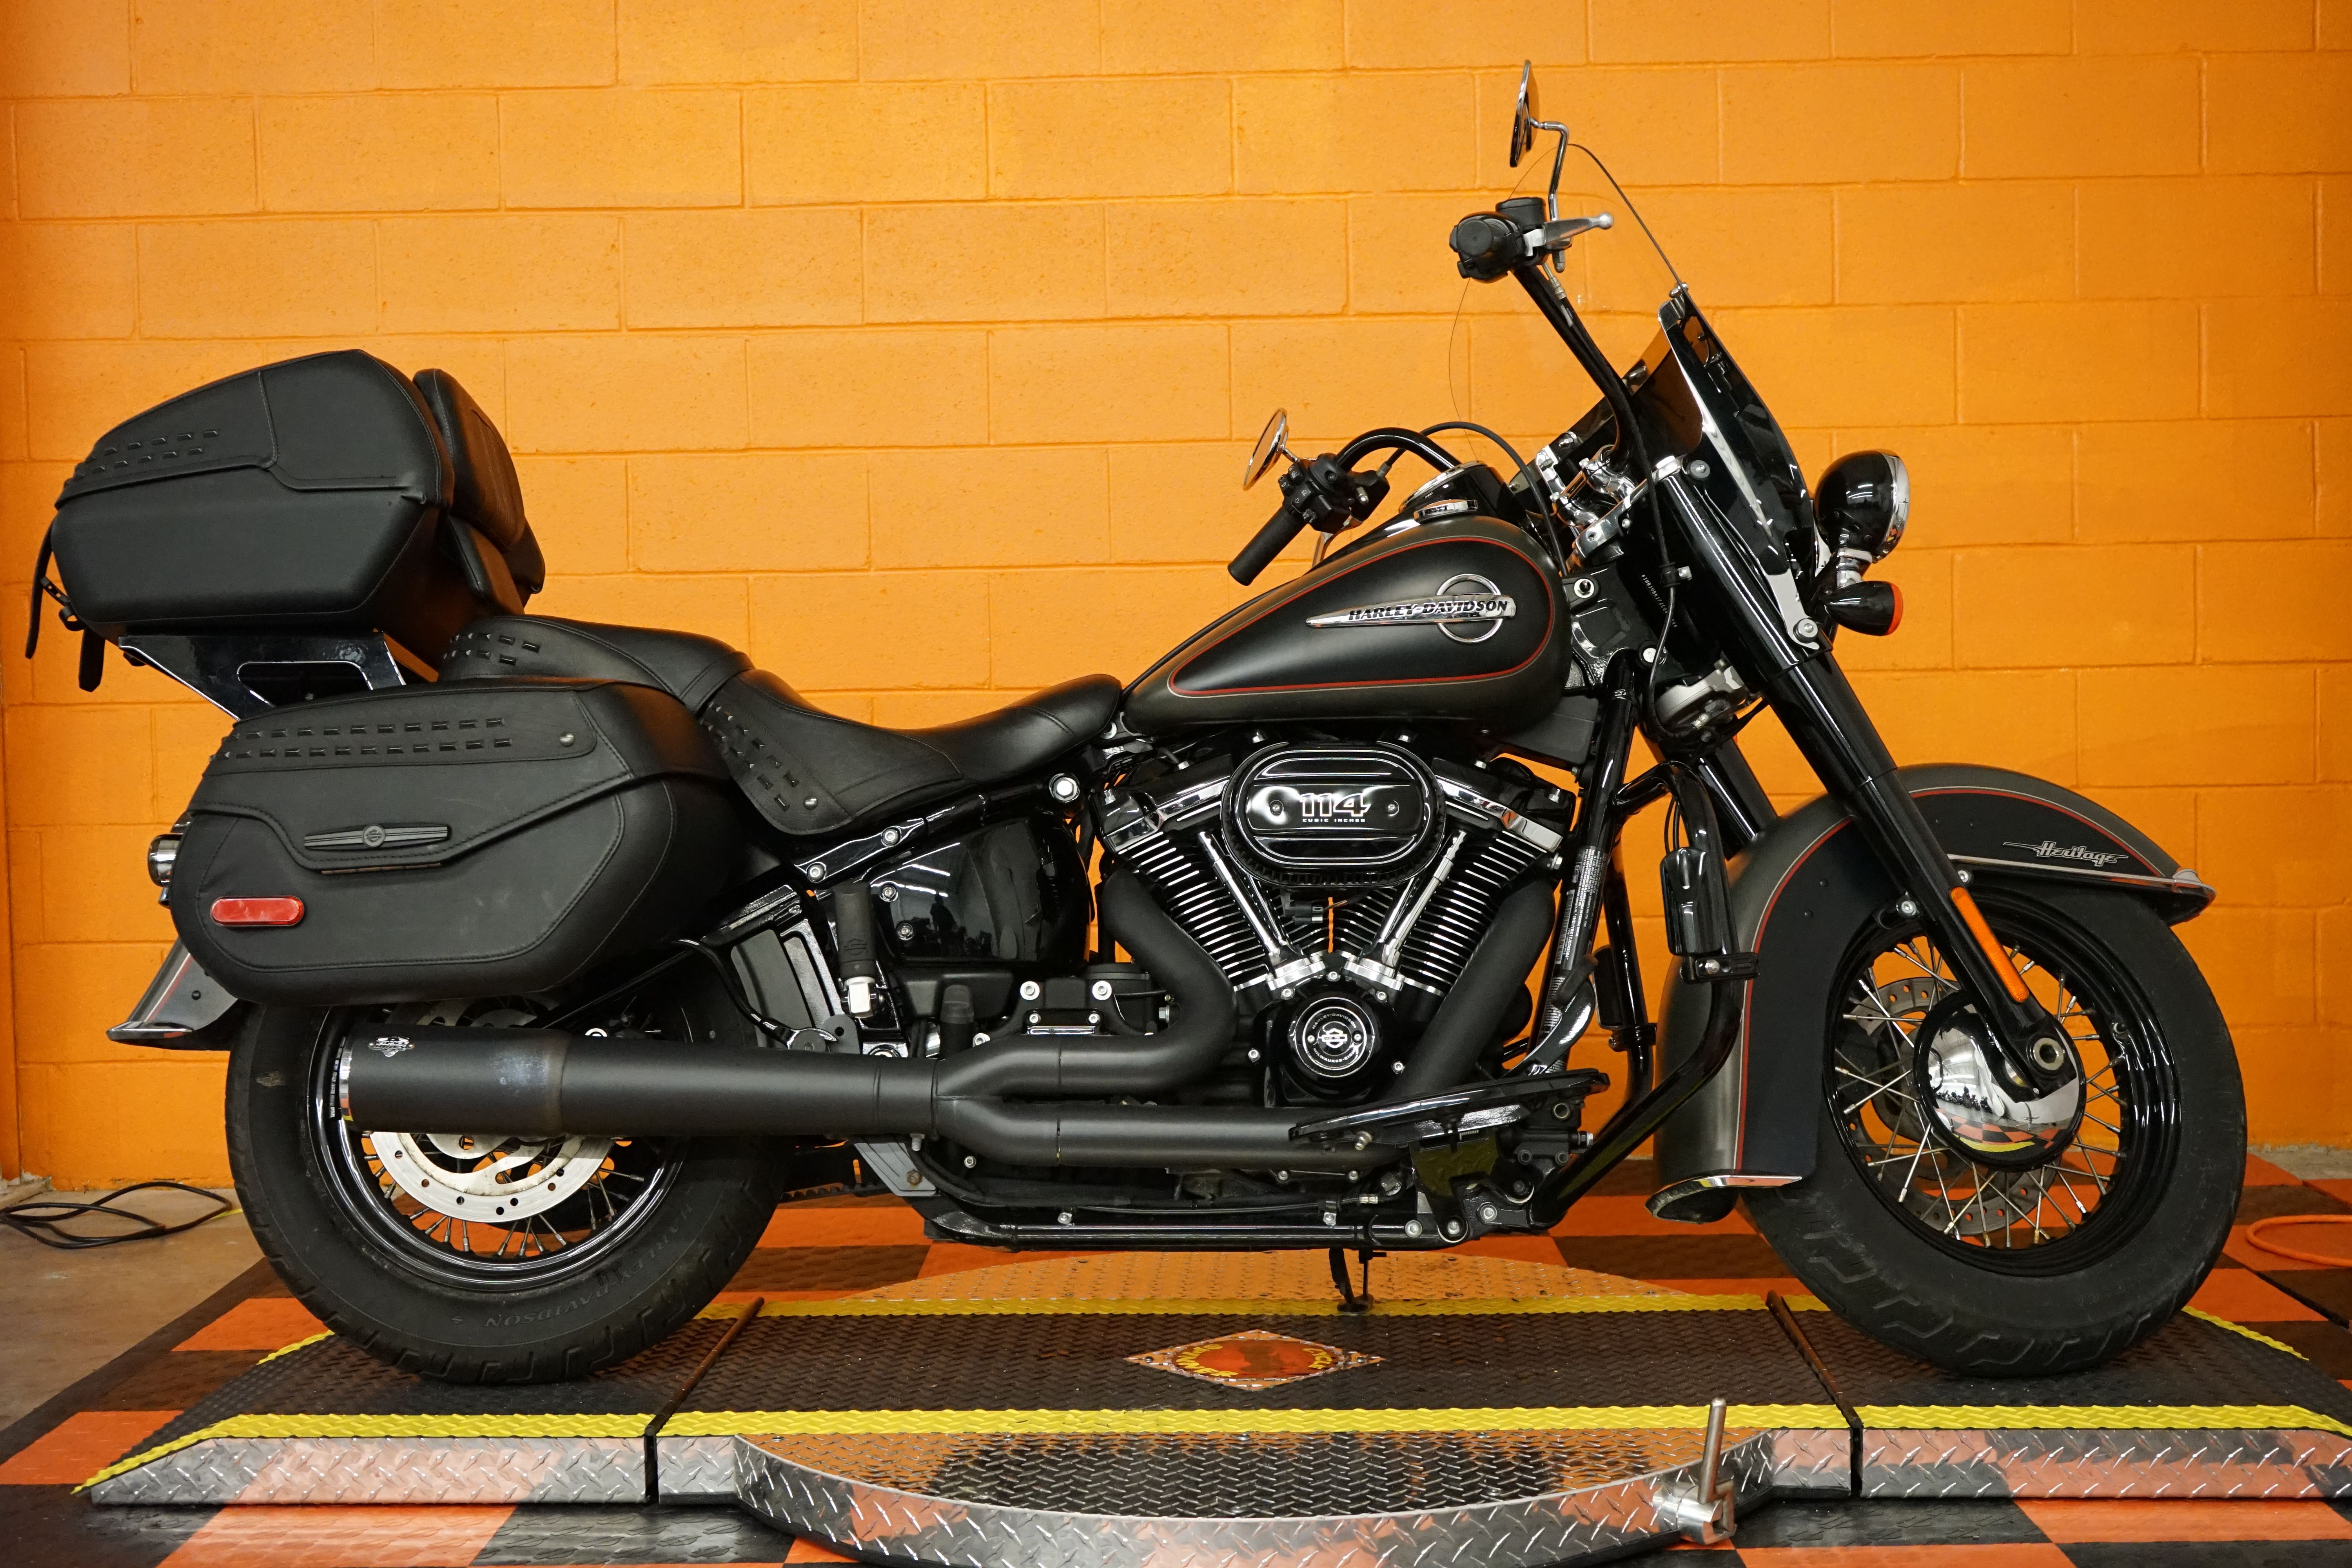 PreOwned 2018 HarleyDavidson Softail Heritage Classic 114 FLHCS